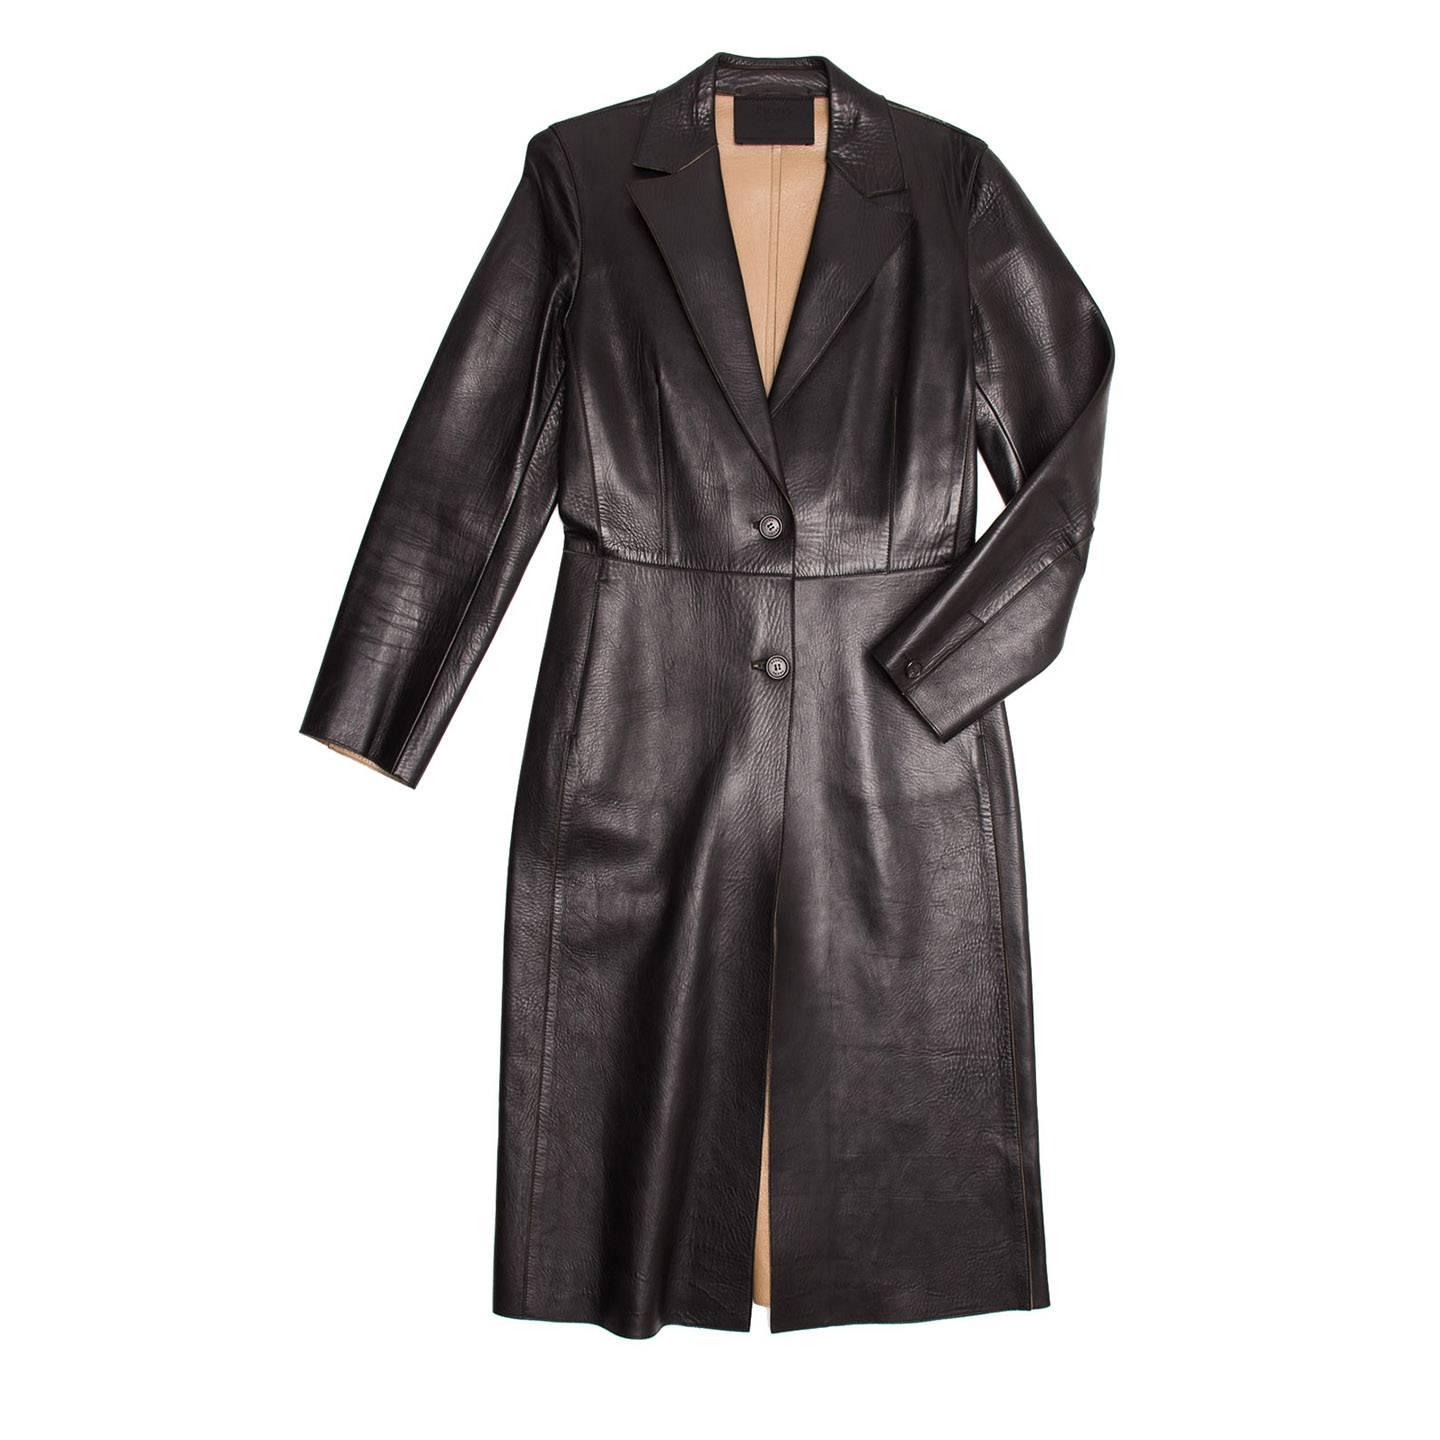 2 buttoned black supple leather bonded coat. Inseam pocket at hip. Single button closure at back cuff. Long back vent for movement and tan interior lining.

Size  44 Italian sizing

Condition  Excellent: worn a few times